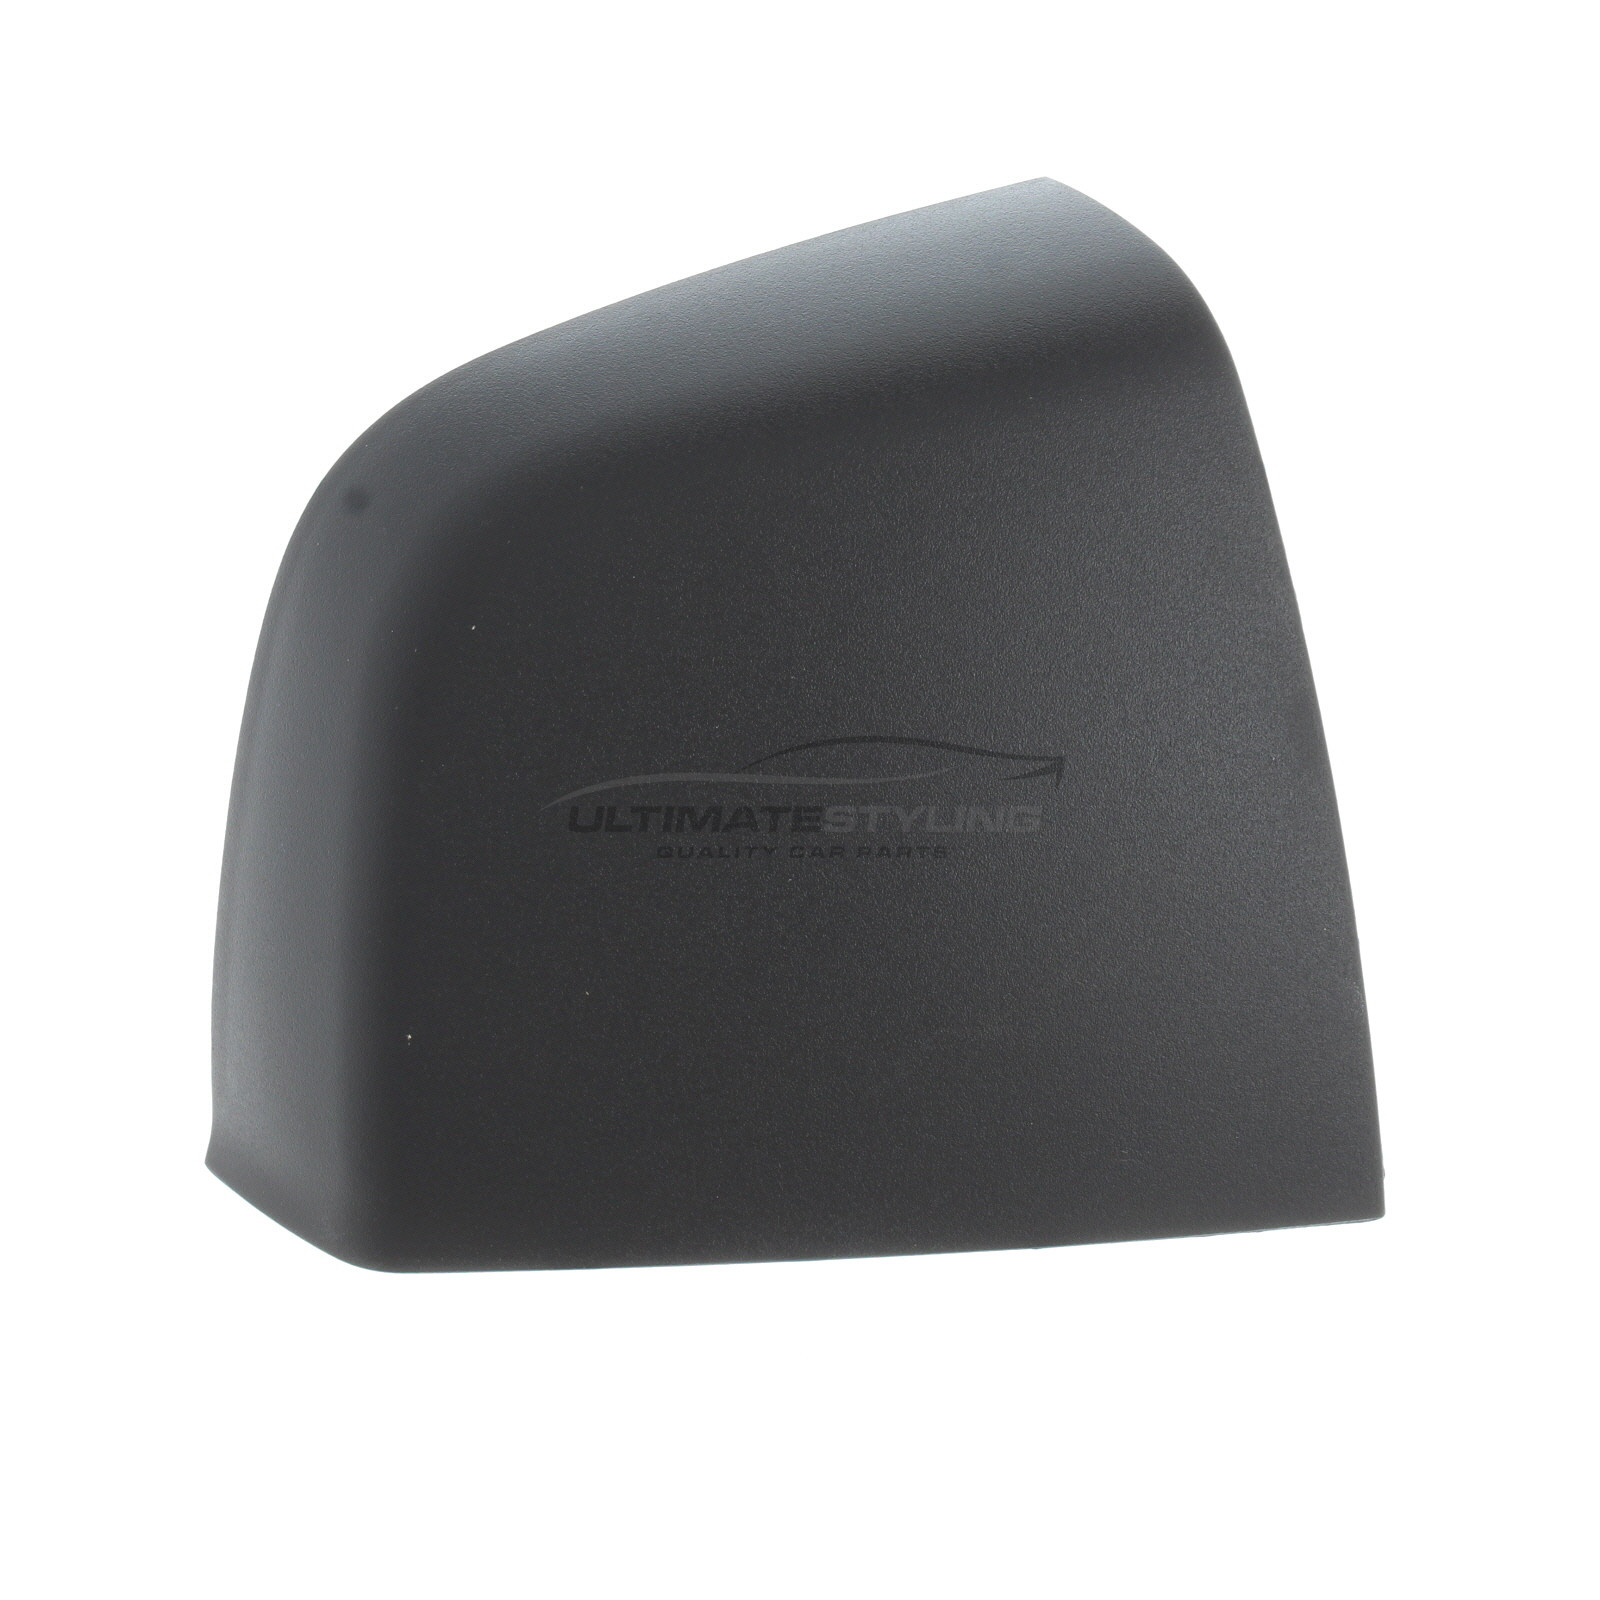 Fiat Doblo 2010-> Wing Mirror Cover Cap Casing Black (Textured) Drivers Side (RH)